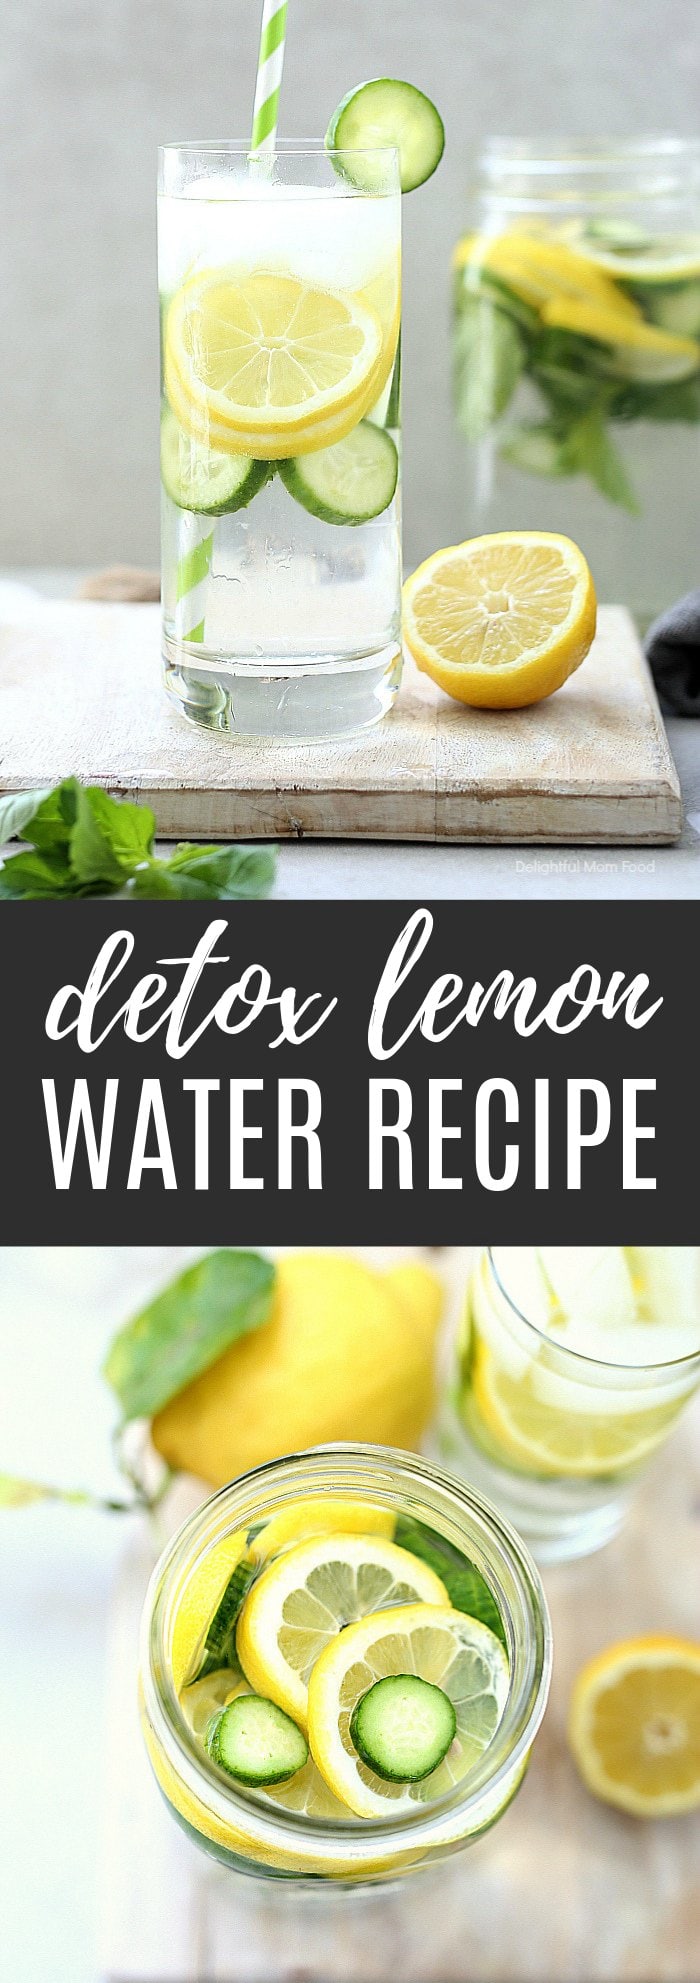 Lemon Cucumber Mint Water aids to detox the body, prevent kidney stones, enhance hydration, has anticancer properties, and supports healthy weight loss. #detox #water #lemon #cucumber #mint #recipe #healthy | recipe at delightfulmomfood.com